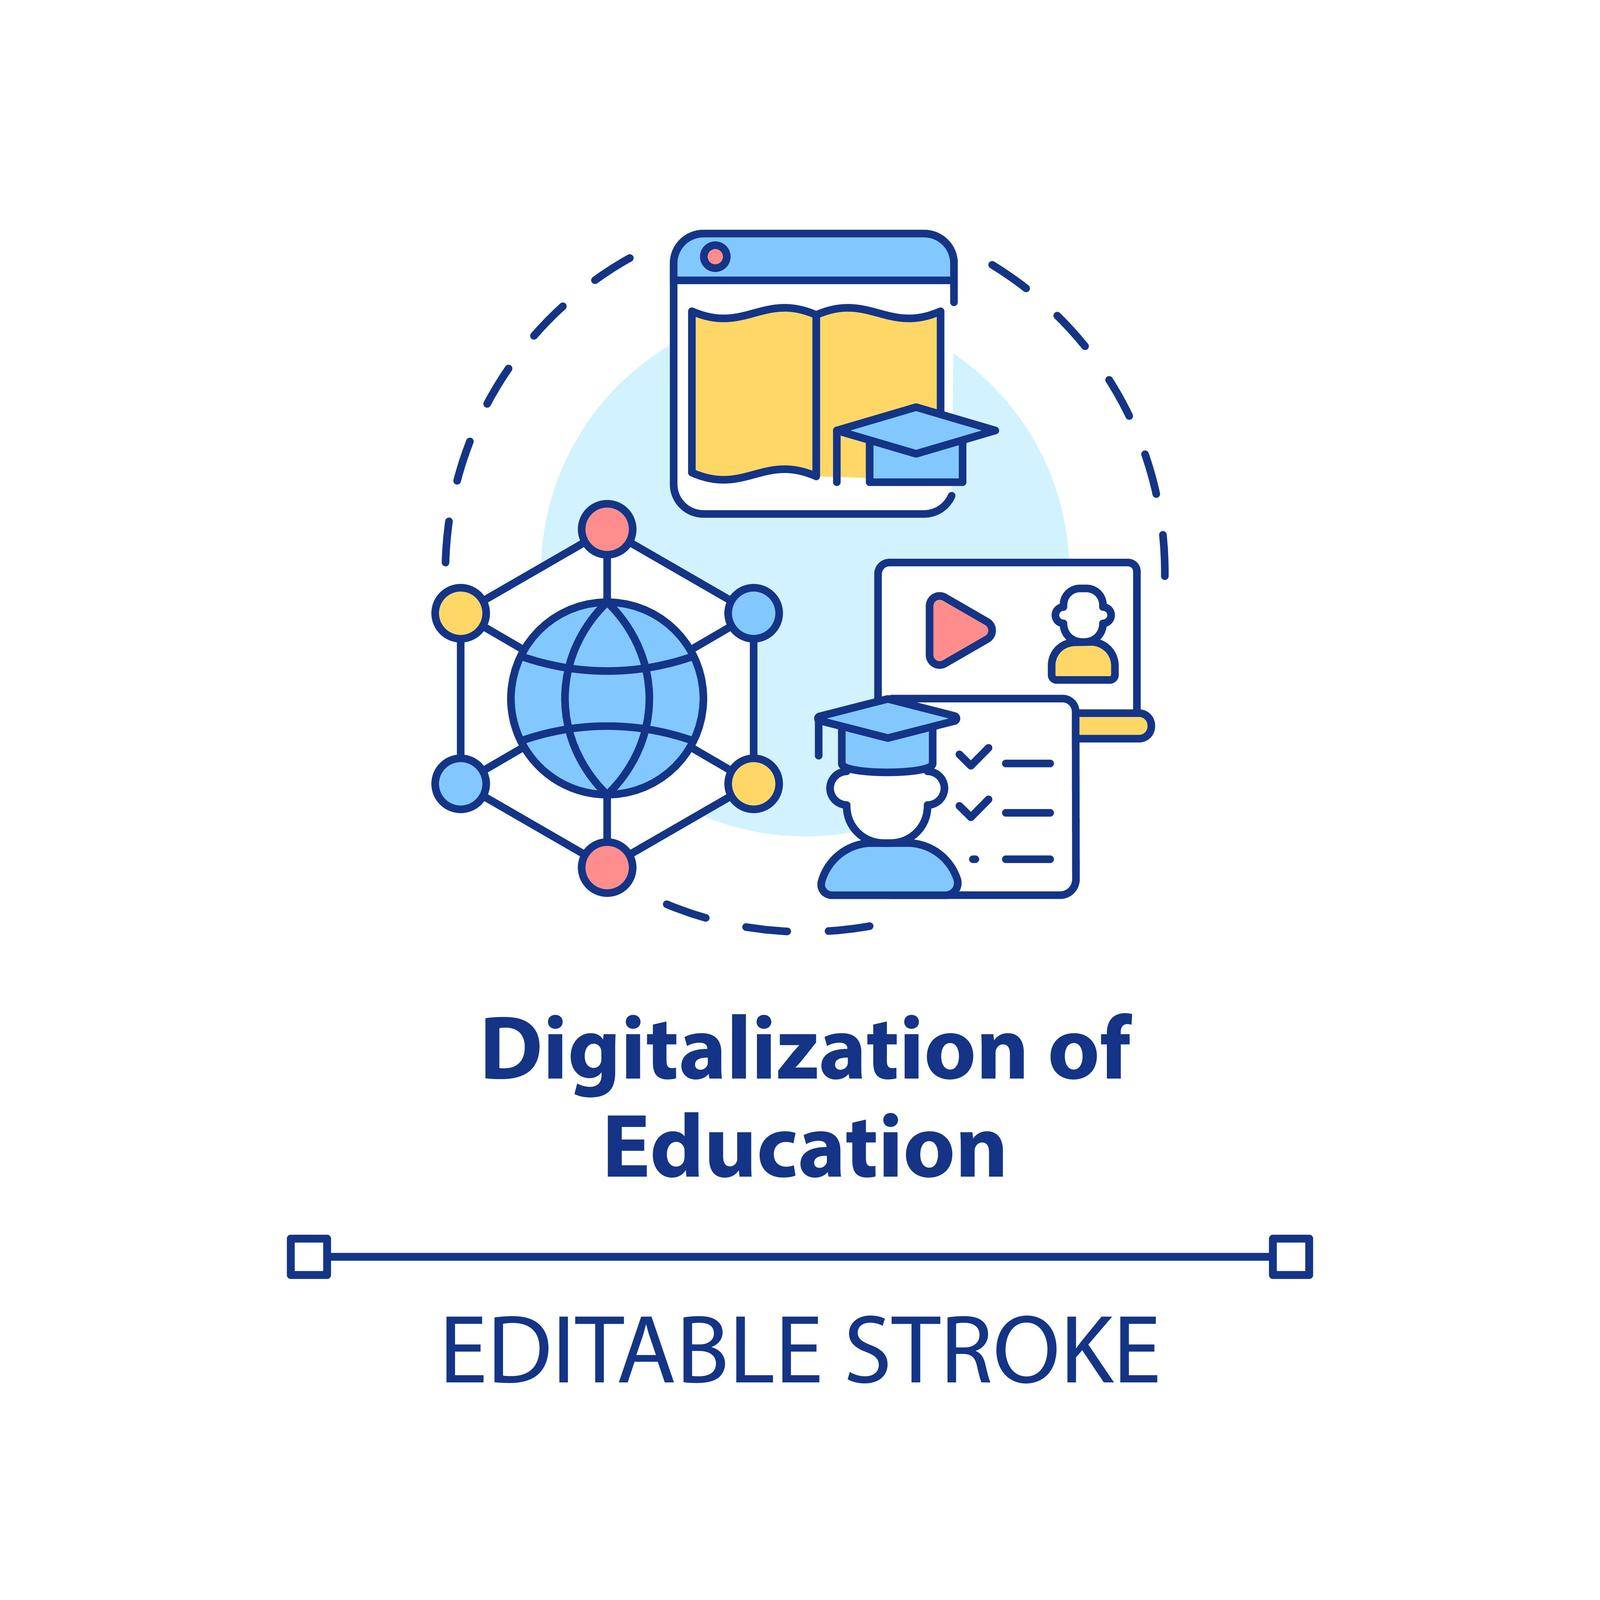 Digitalization of education concept icon by bsd studio